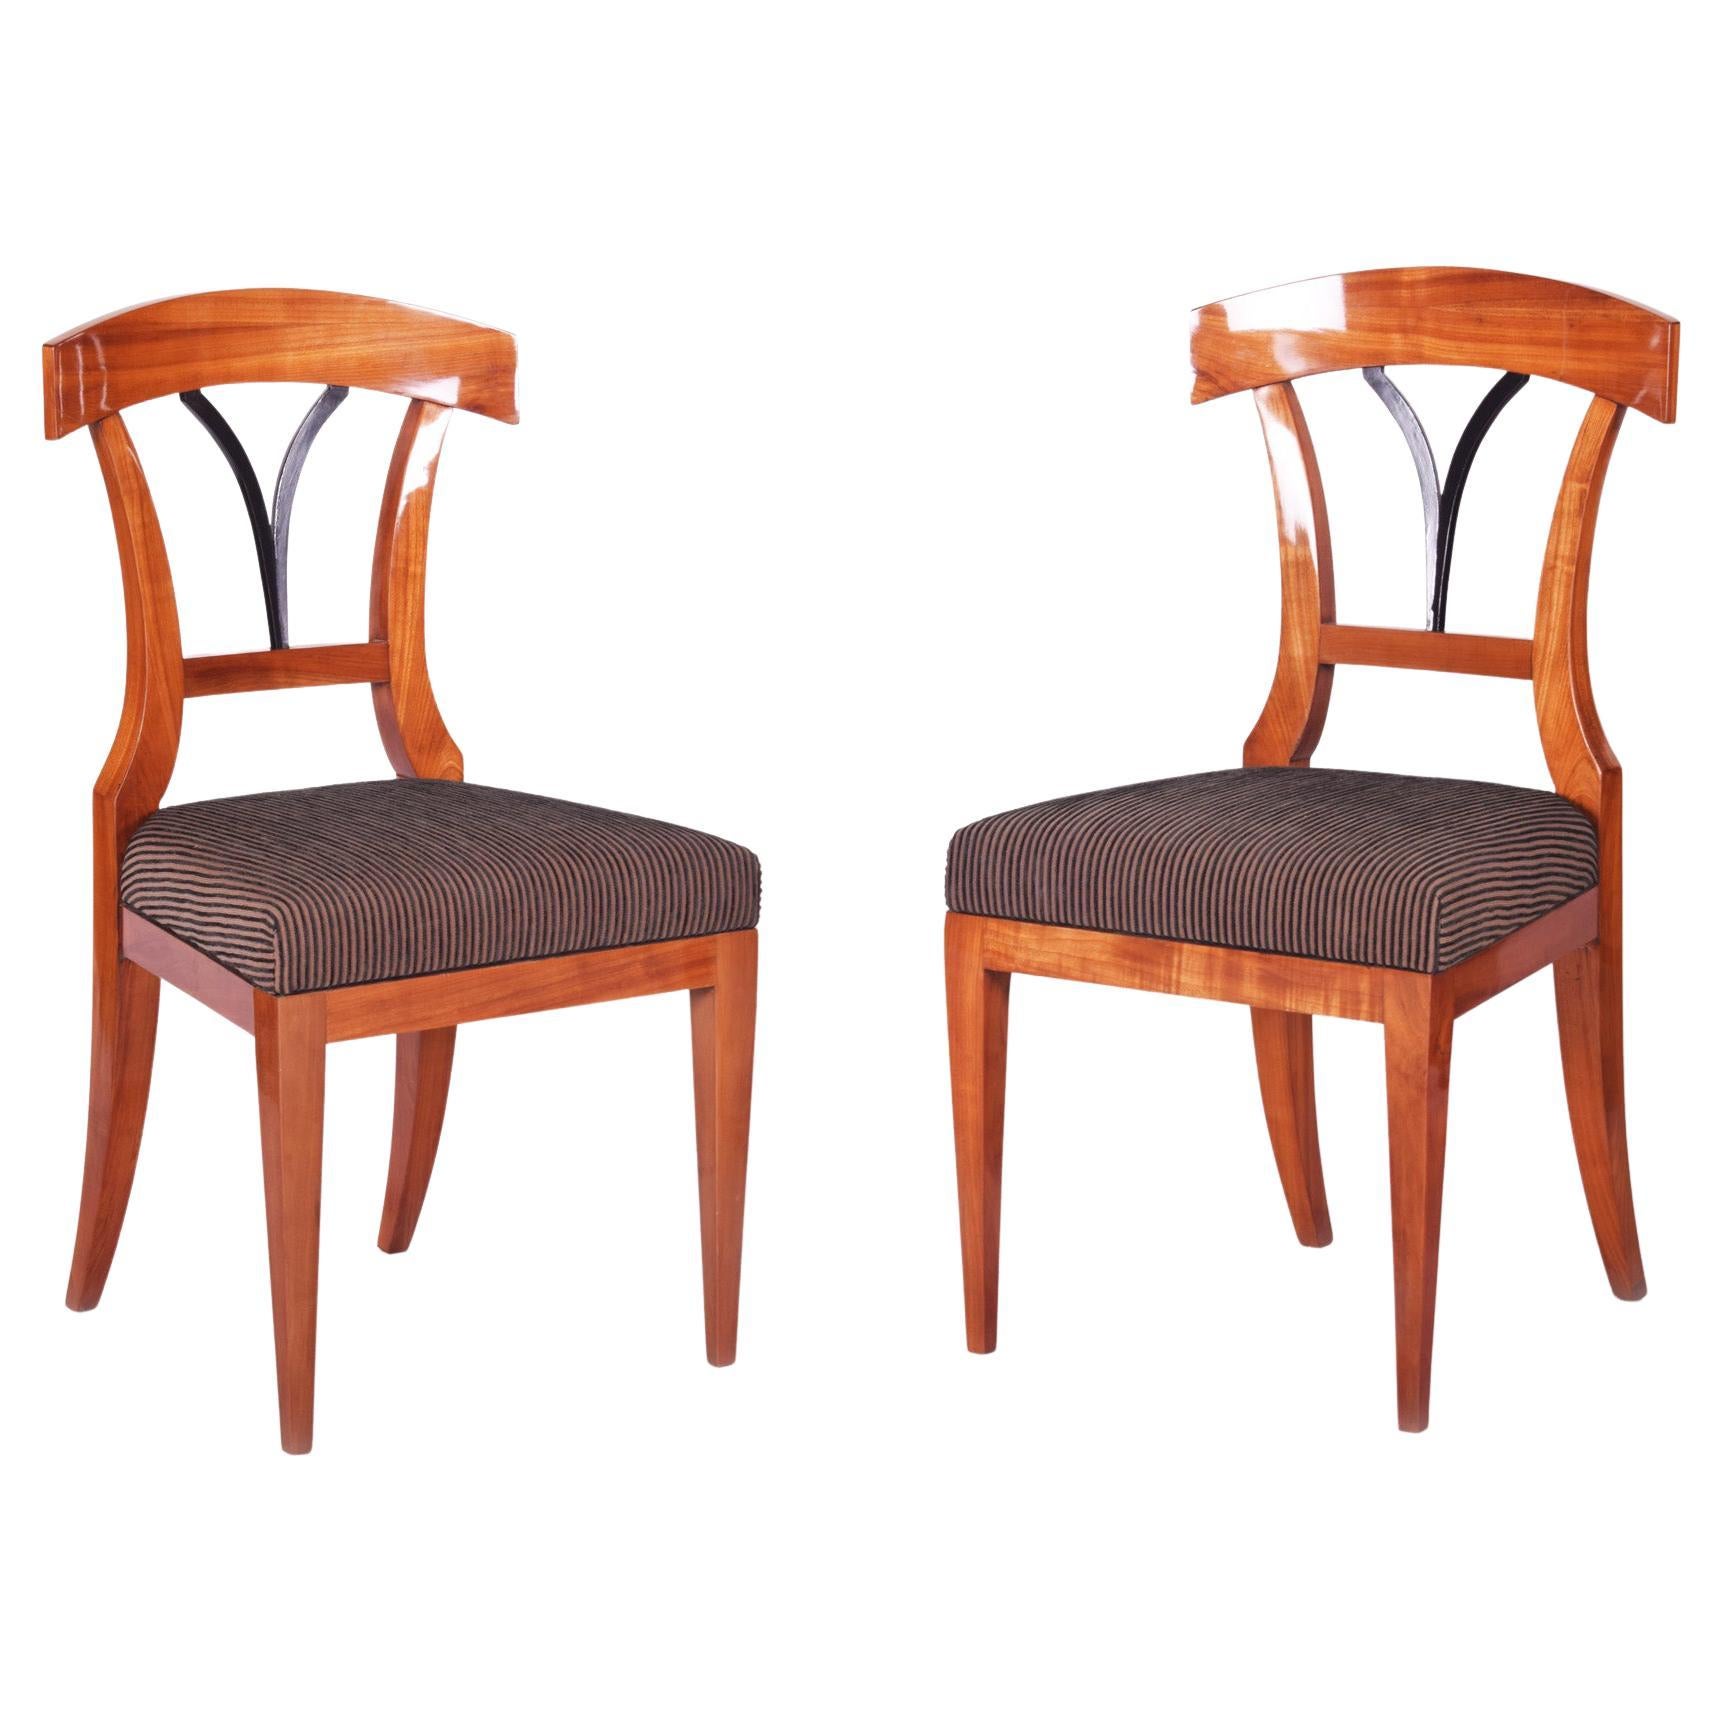 Pair of 19th Century Biedermeier Dining Chairs Made in 1930s Czechia For Sale